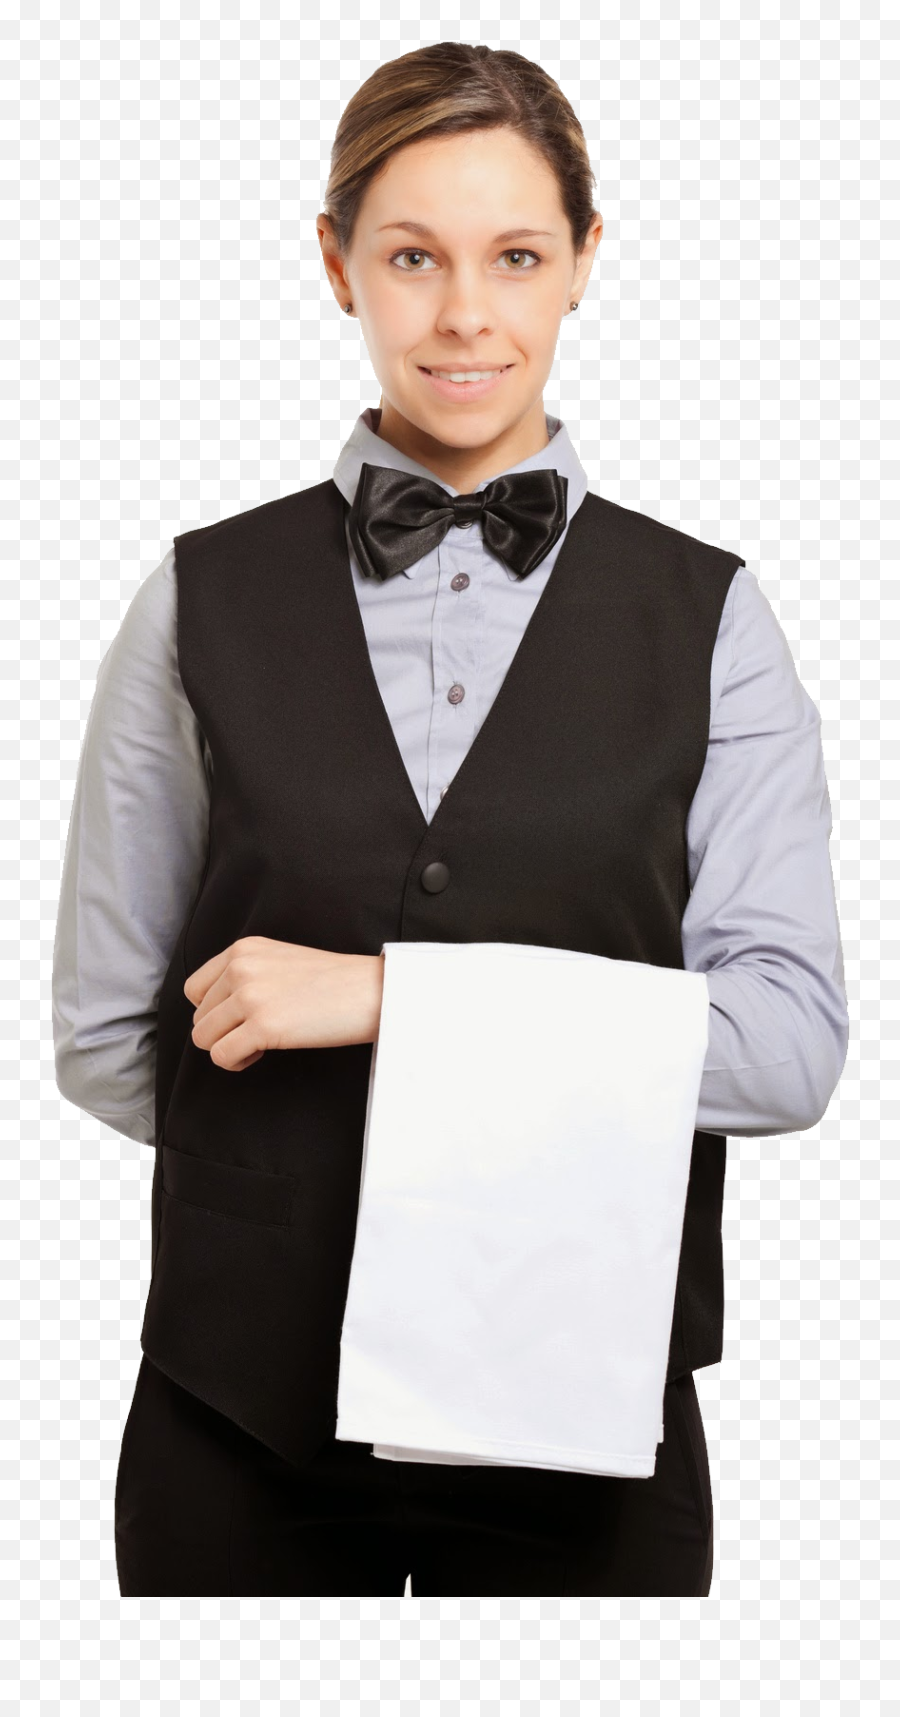 Download Free Png Waitress Images - National Waiters And Waitresses Day,Waitress Png